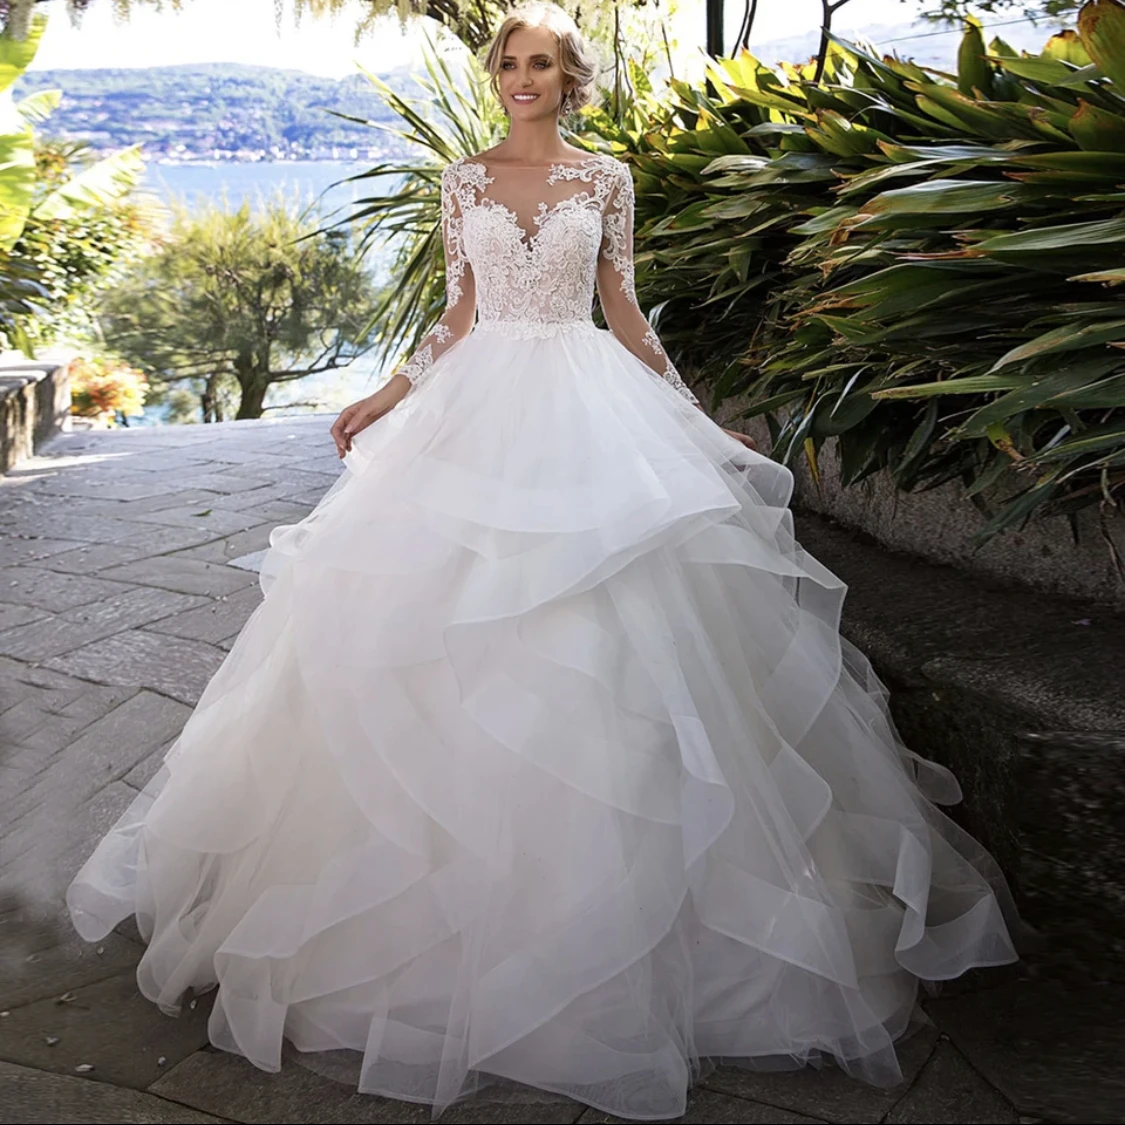 

11681-1#O-Neck Long Sleeve Tulle Sweep Train Open Back Tiered A-Line Lace Applique Wedding Dress Wedding Gown Bridal Gown